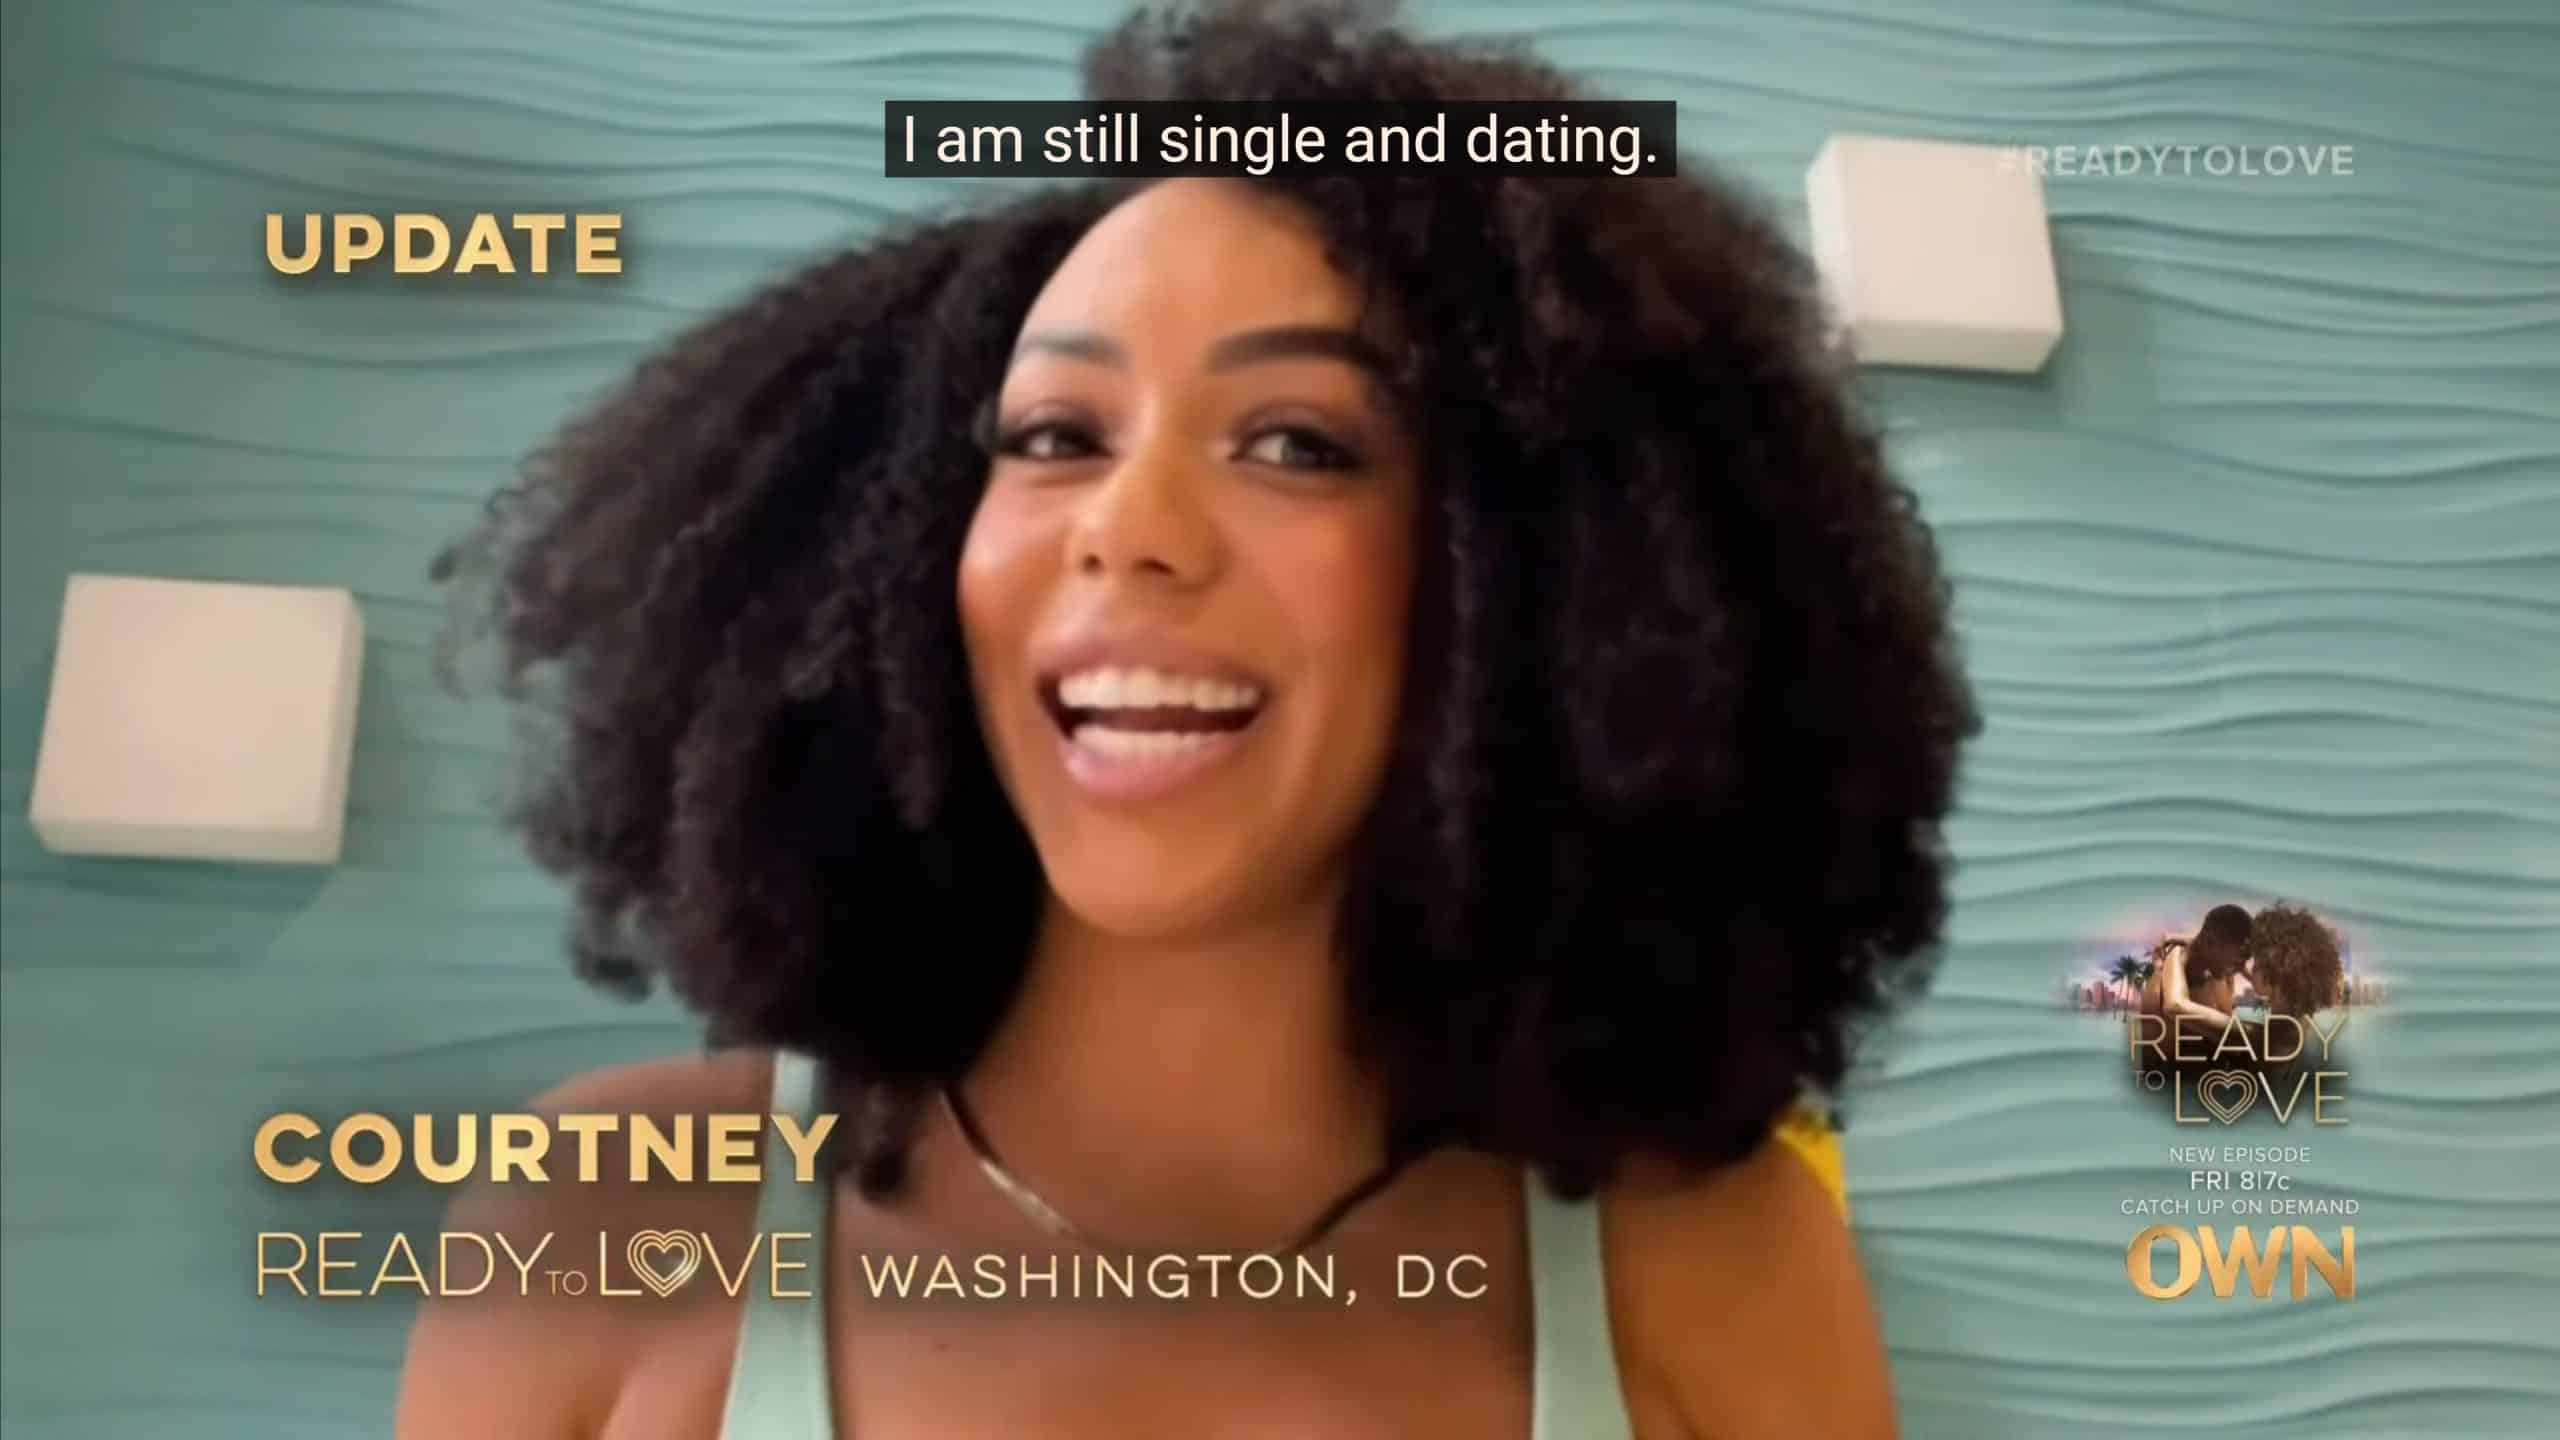 Courtney noting she is single and dating